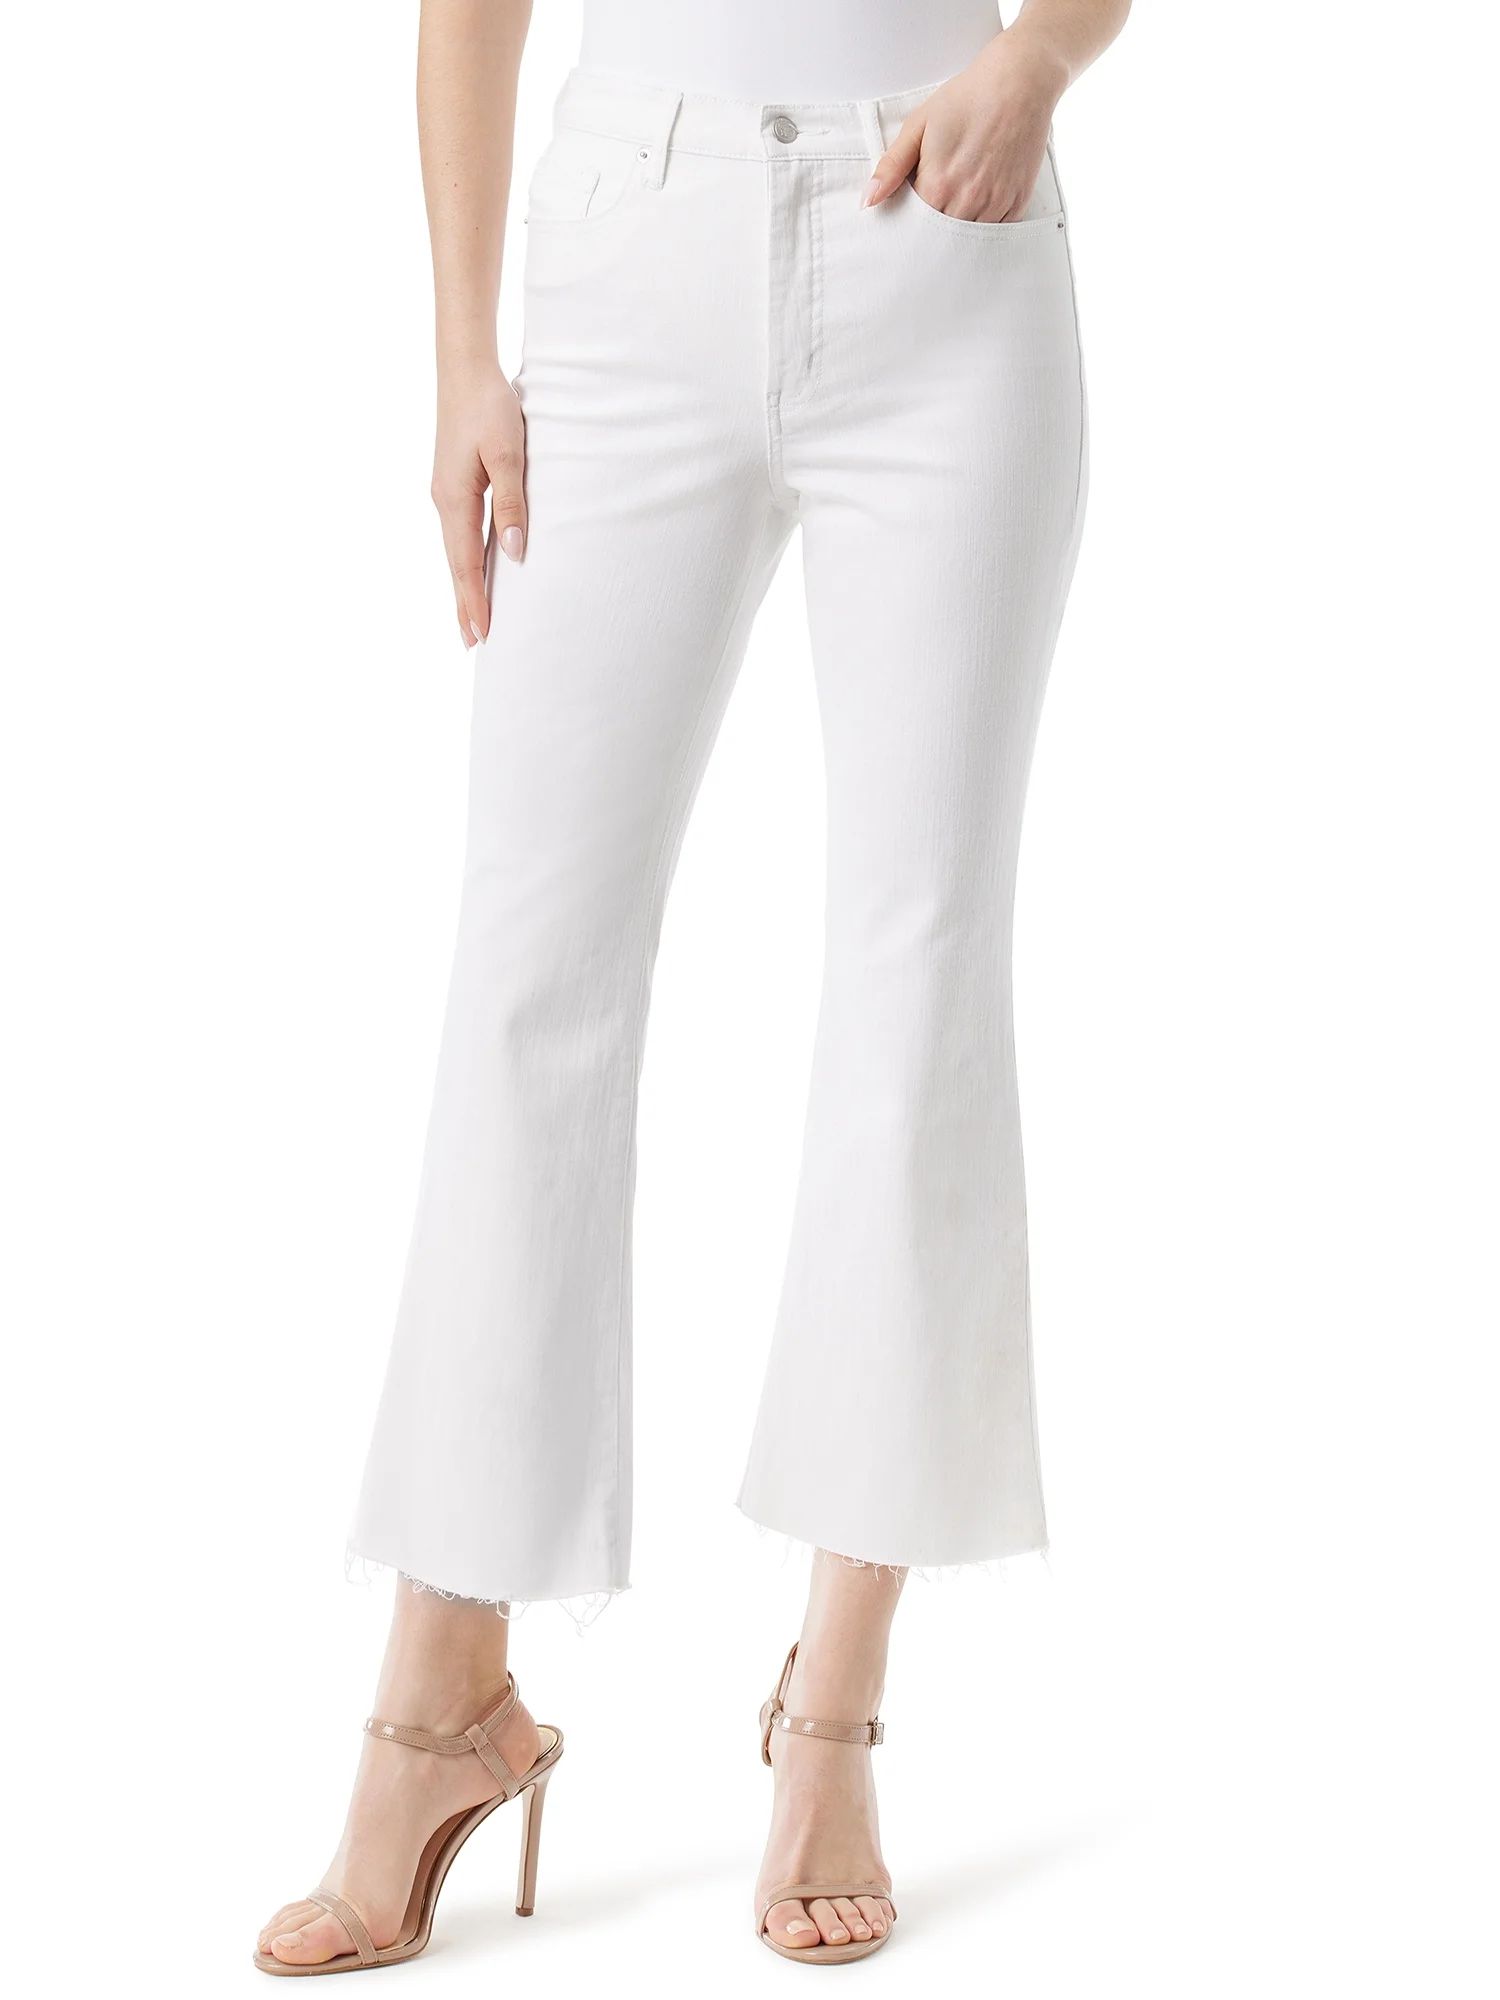 Jessica Simpson Women's and Women's Plus Daisy Ankle Flare Jeans, Sizes 2-26W | Walmart (US)